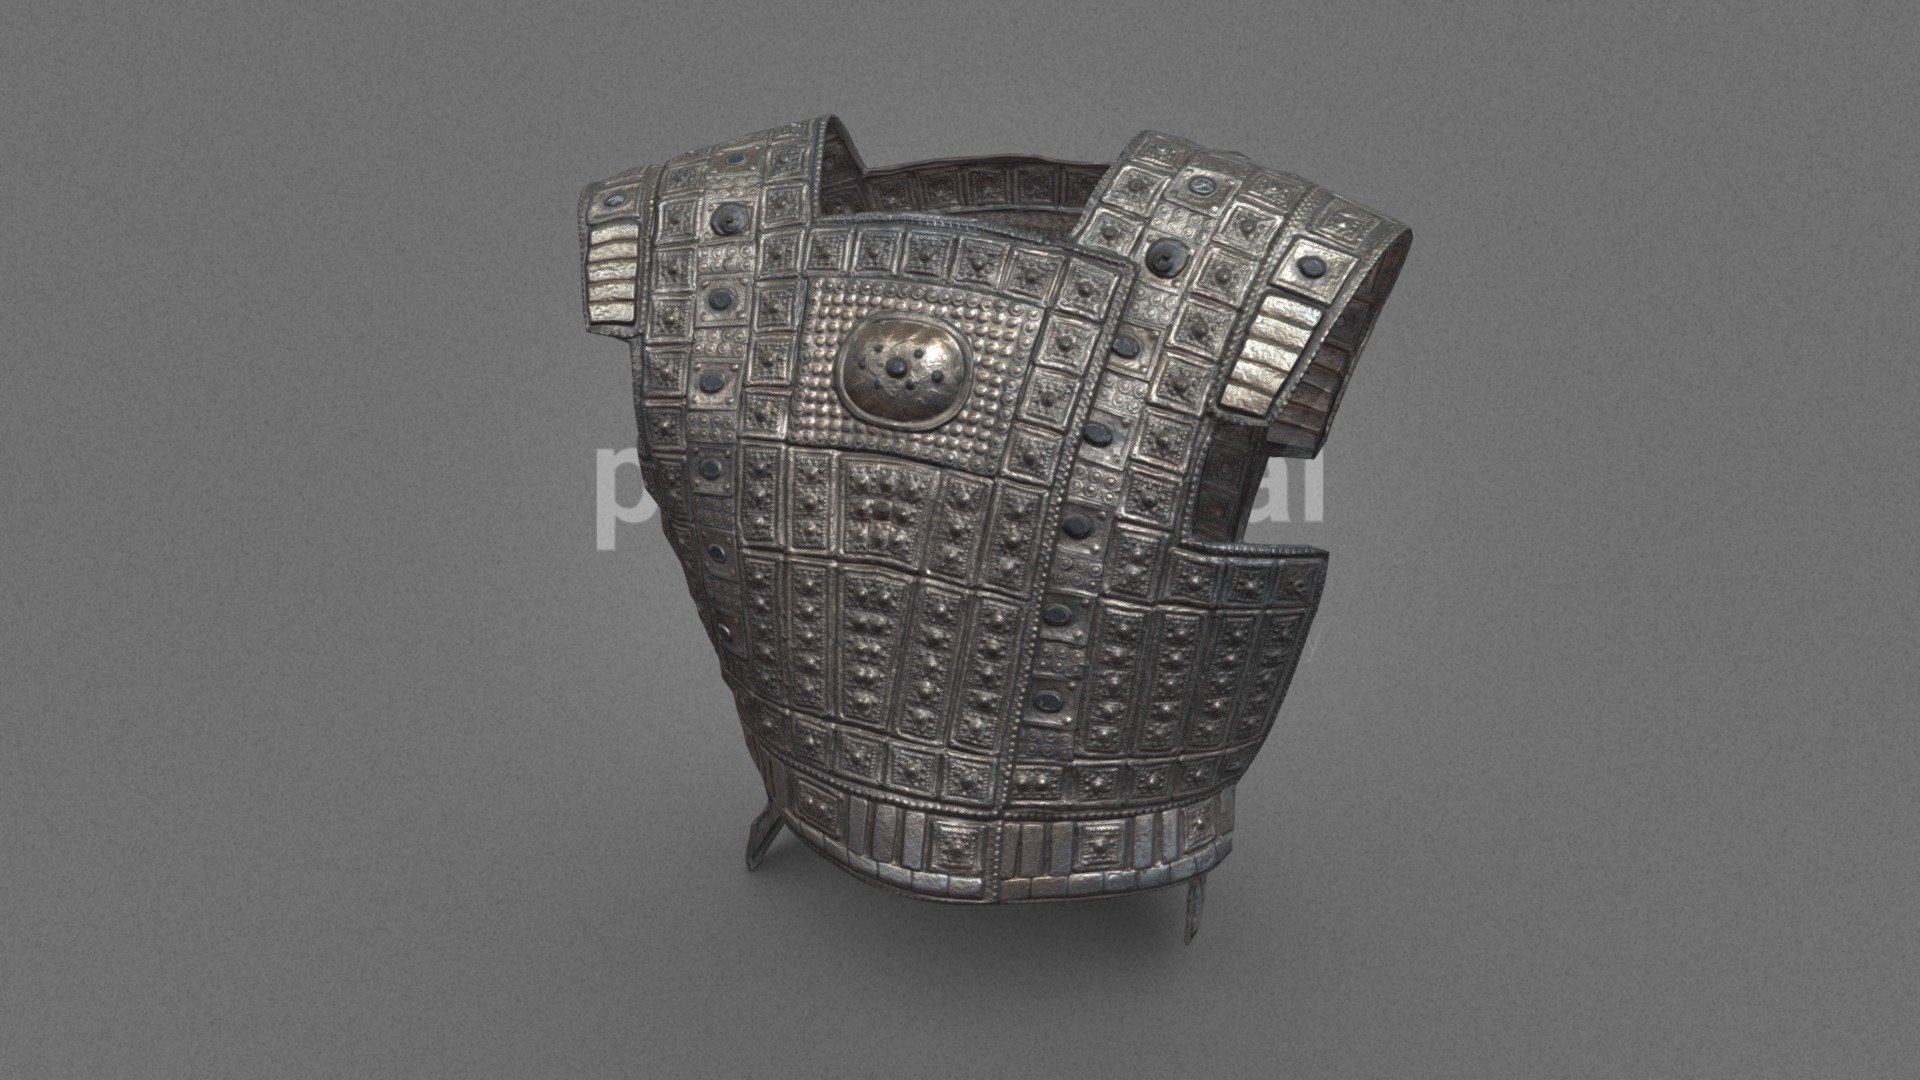 Ancient Greek Trojan armour

We are Peris Digital, and we make RAW meshes (Photogrammetry) and Digital Doubles.

This is a RAW mesh, taken by our photogrammetry team in our RIG with 144 Sony Alpha cameras.
Check our web, make your selection and contact us to get your costume scanned or talk with us to take a Demo RAW mesh to download it.

Contact: info@peris.costumes - Cuirass armour 13 - 3D model by Peris Digital (@perisdigital) 3d model